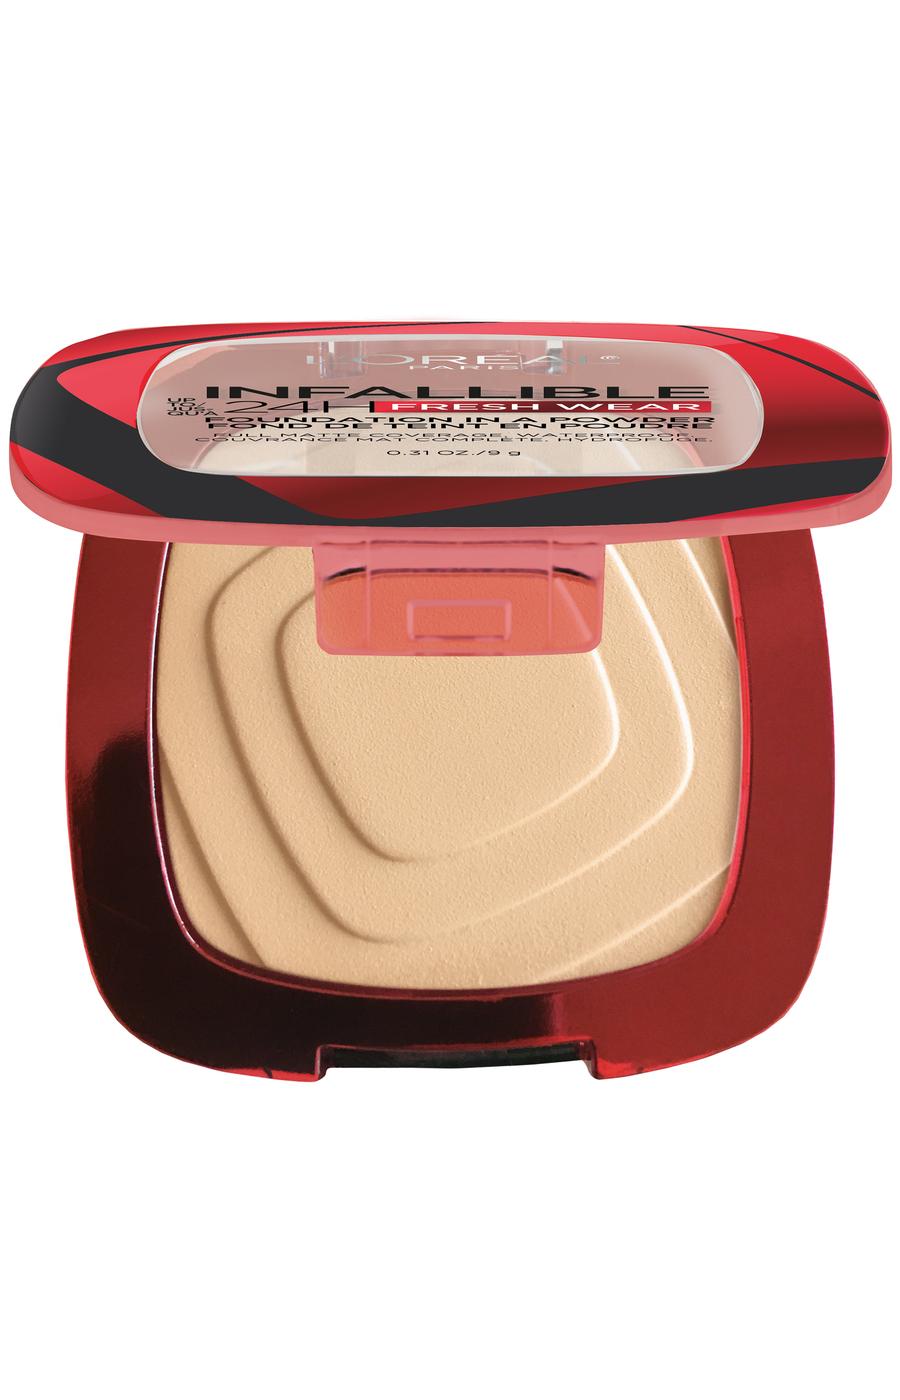 L'Oréal Paris Infallible Up to 24H Fresh Wear Foundation in a Powder Linen; image 2 of 4